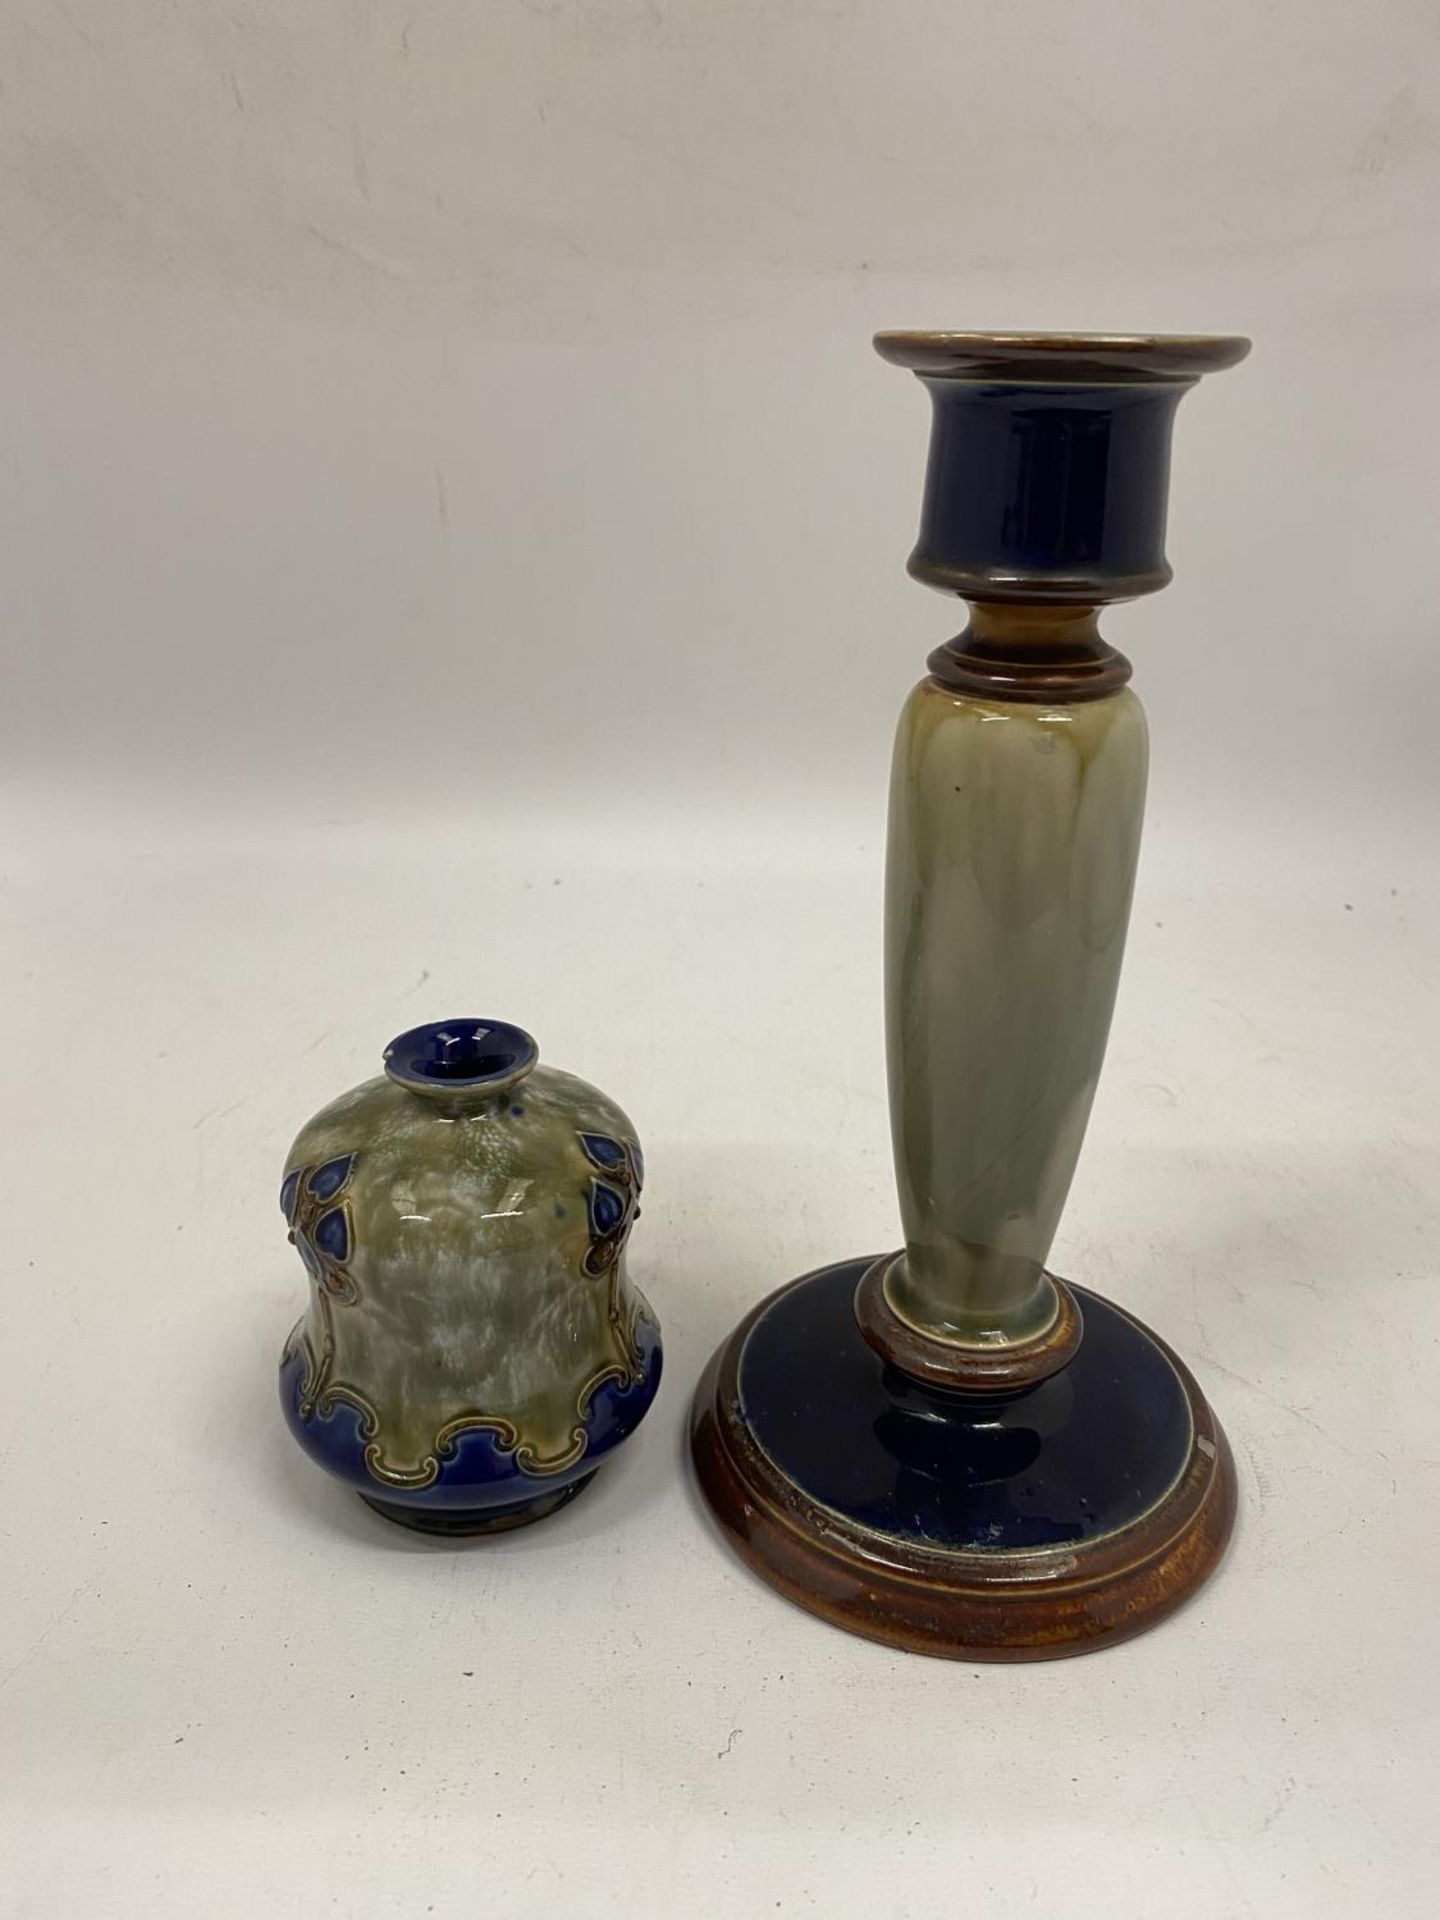 TWO PIECES OF ROYAL DOULTON STONEWARE TO INCLUDE A CANDLESTICK AND A SMALL VASE